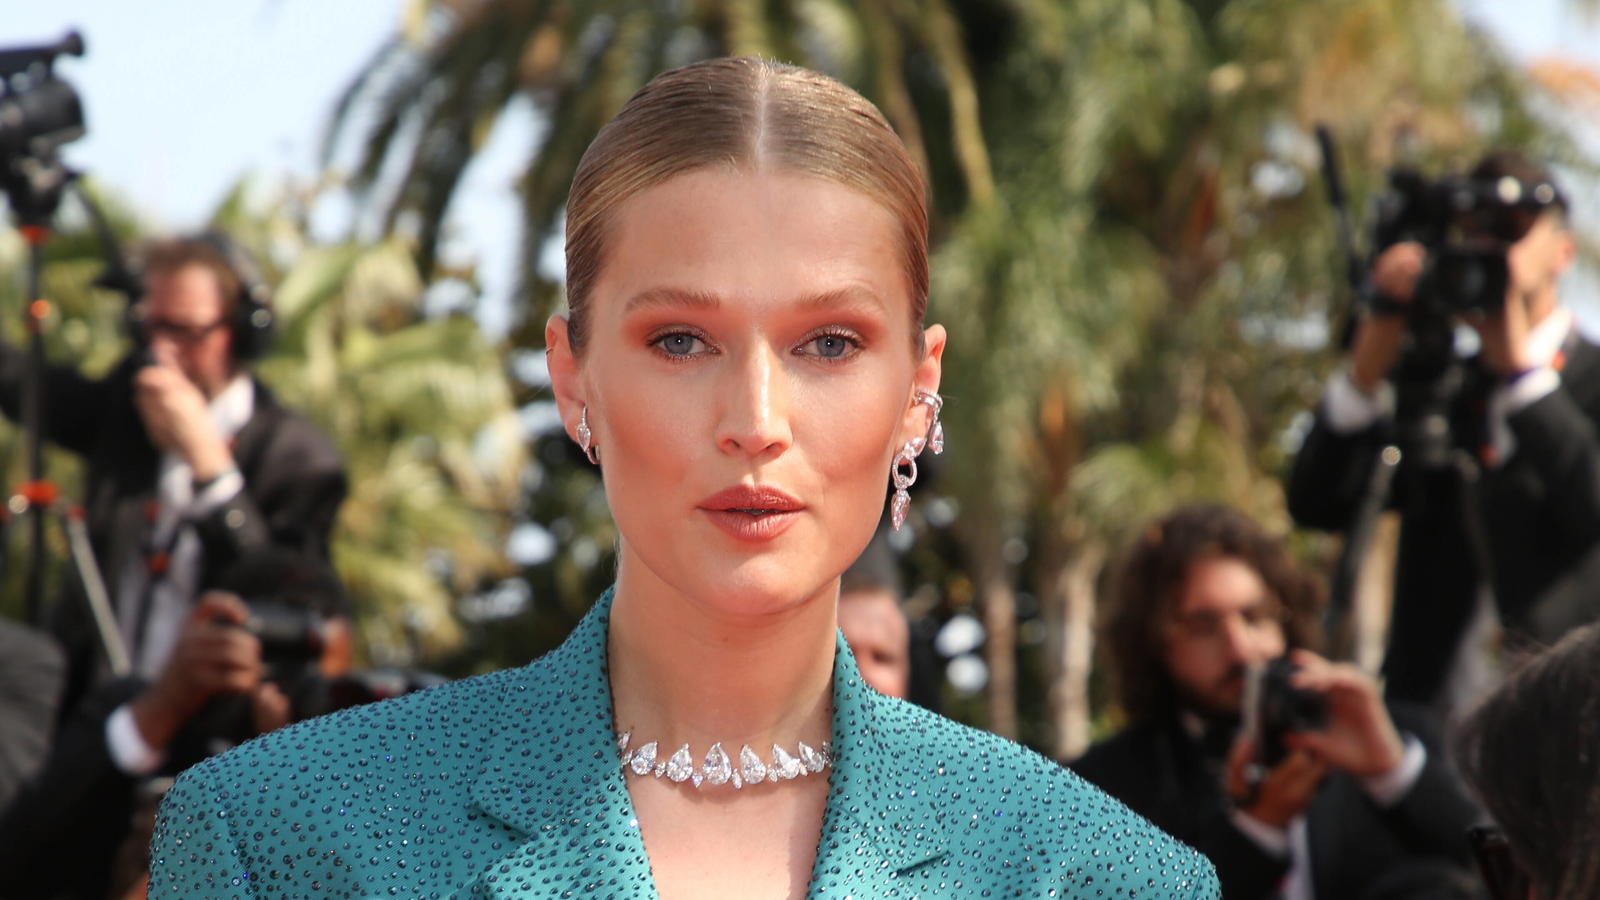  May 21, 2022, Cannes, France: Toni Garrn attends the screening of Triangle Of Sadness during the 75th annual Cannes film festival at Palais des Festivals. CANNES FRANCE - ZUMA Sad 20220521_zea_s181_085 Copyright: xImagespacex